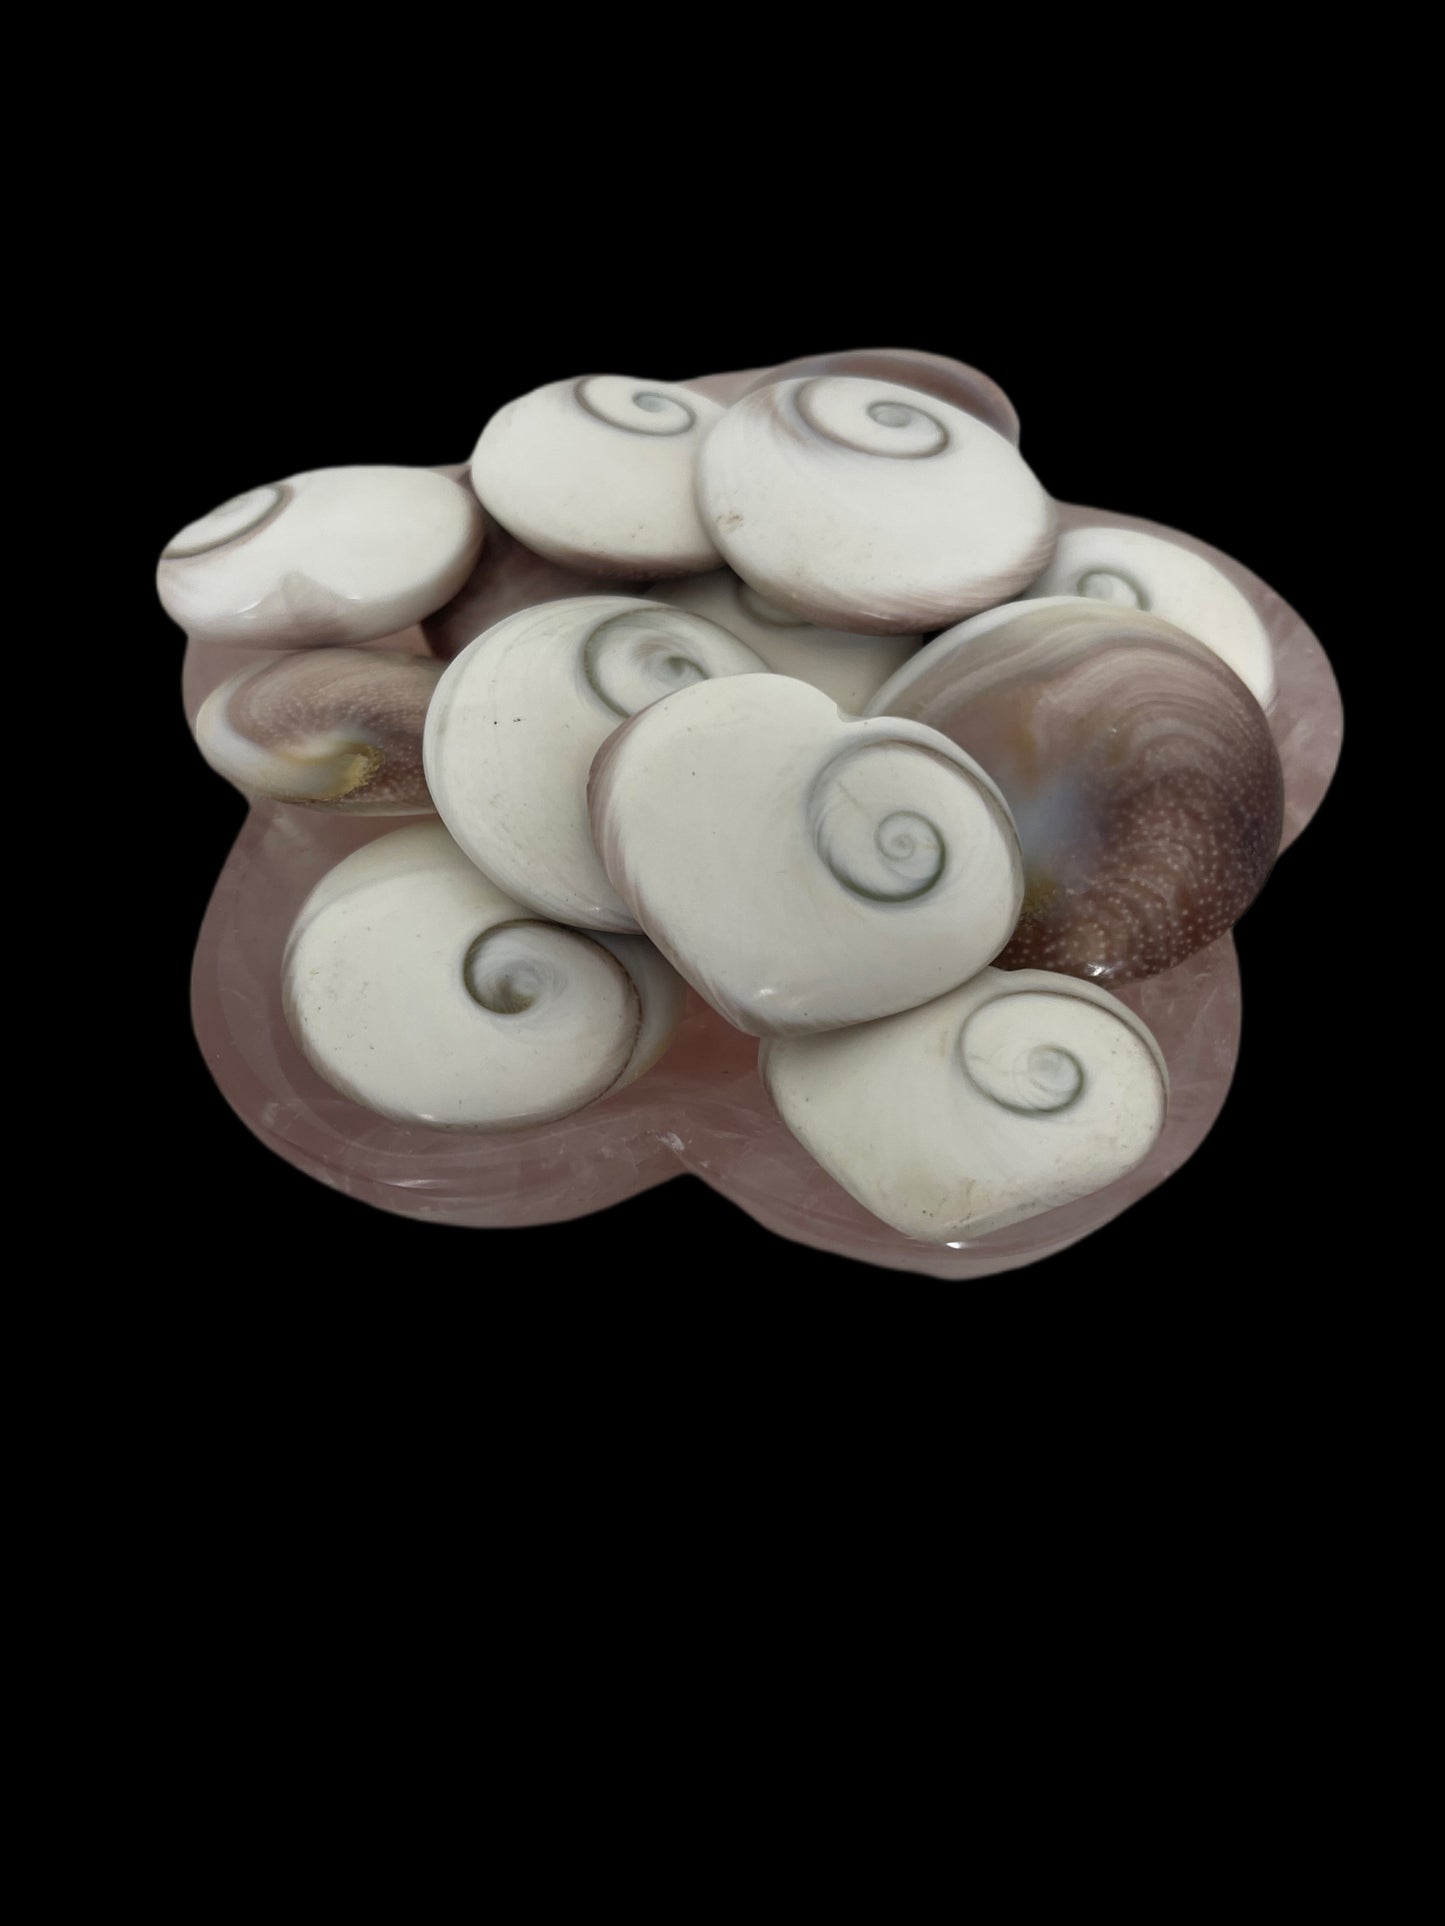 Shiva Shells - Available at West Palm Only